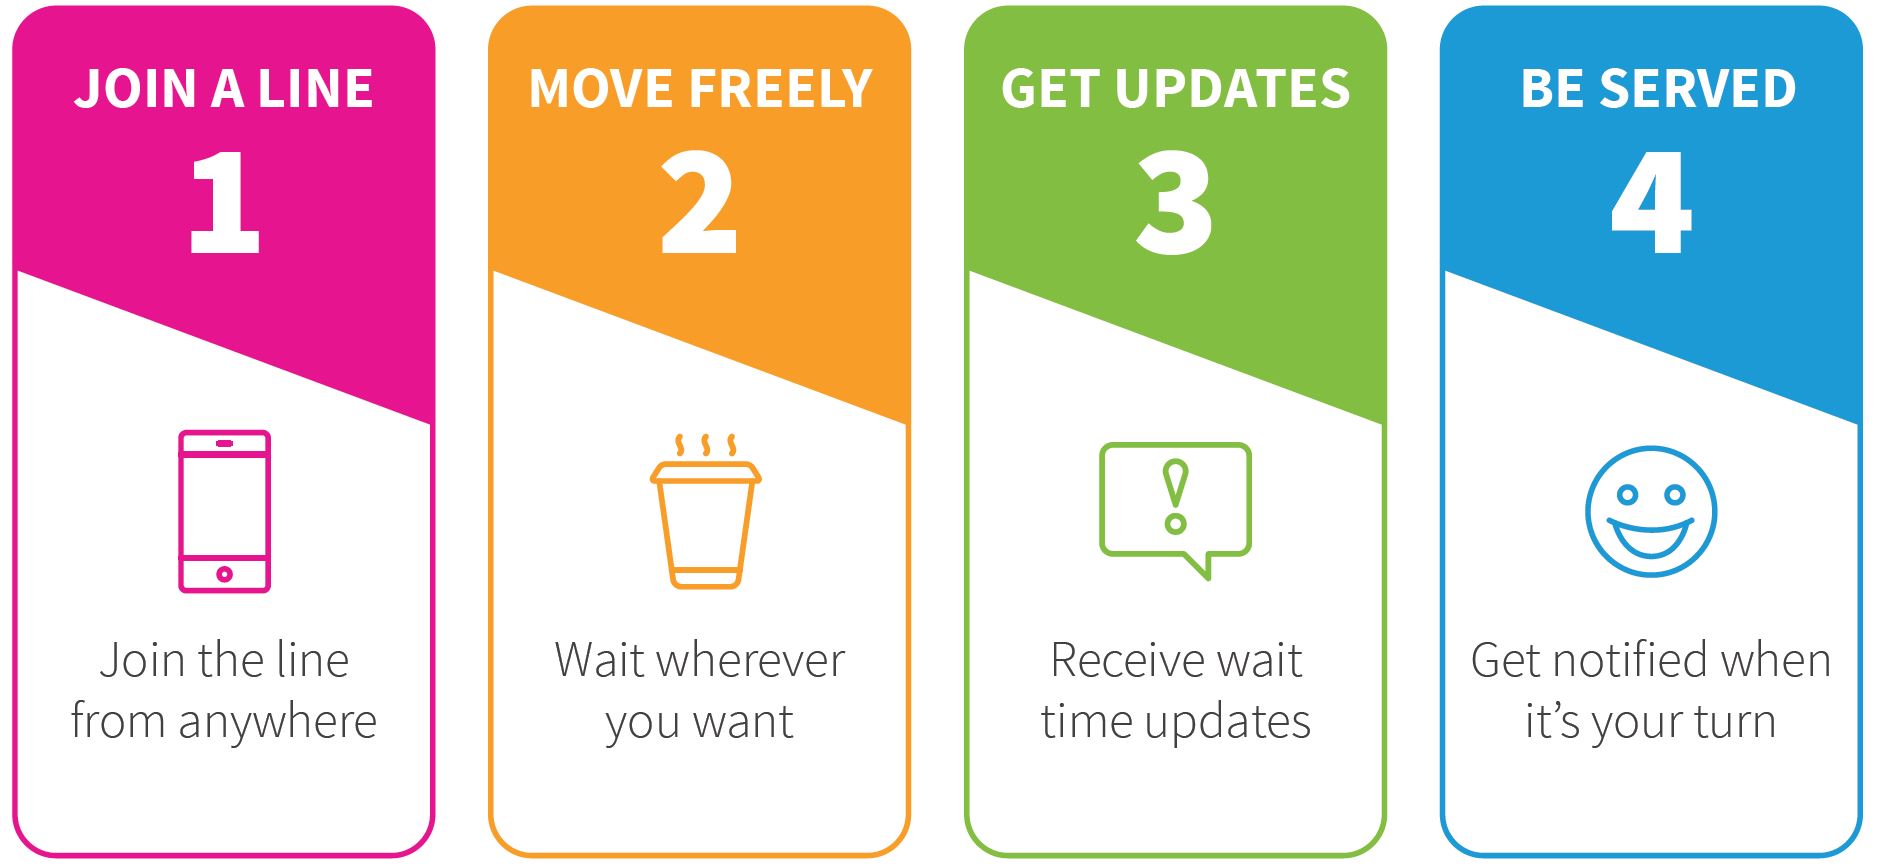 QLess steps: 1. join a line; 2. move freely; 3. get updates; 4. be served